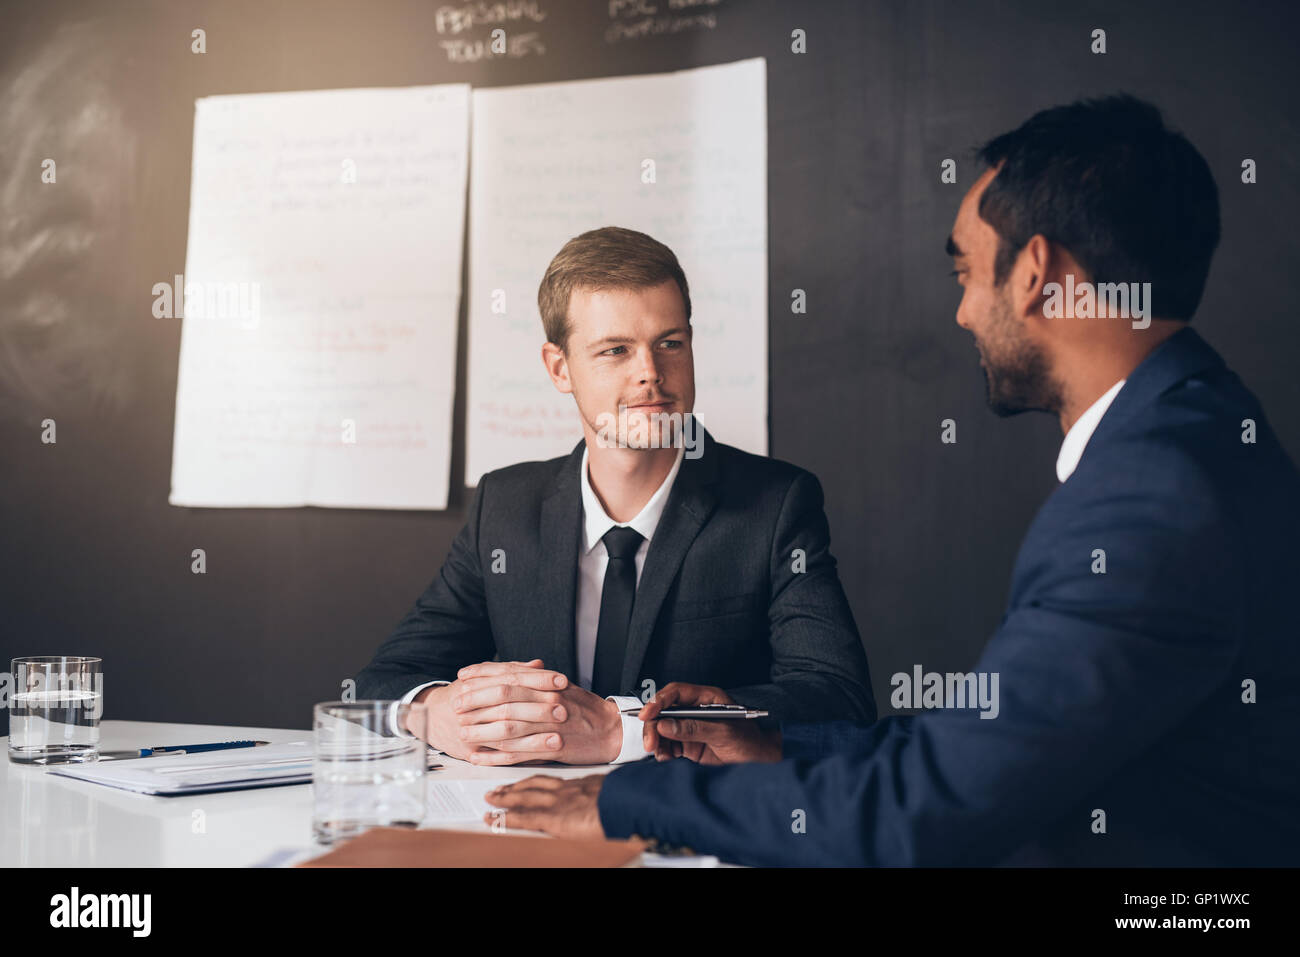 Talking business in the boardroom Stock Photo